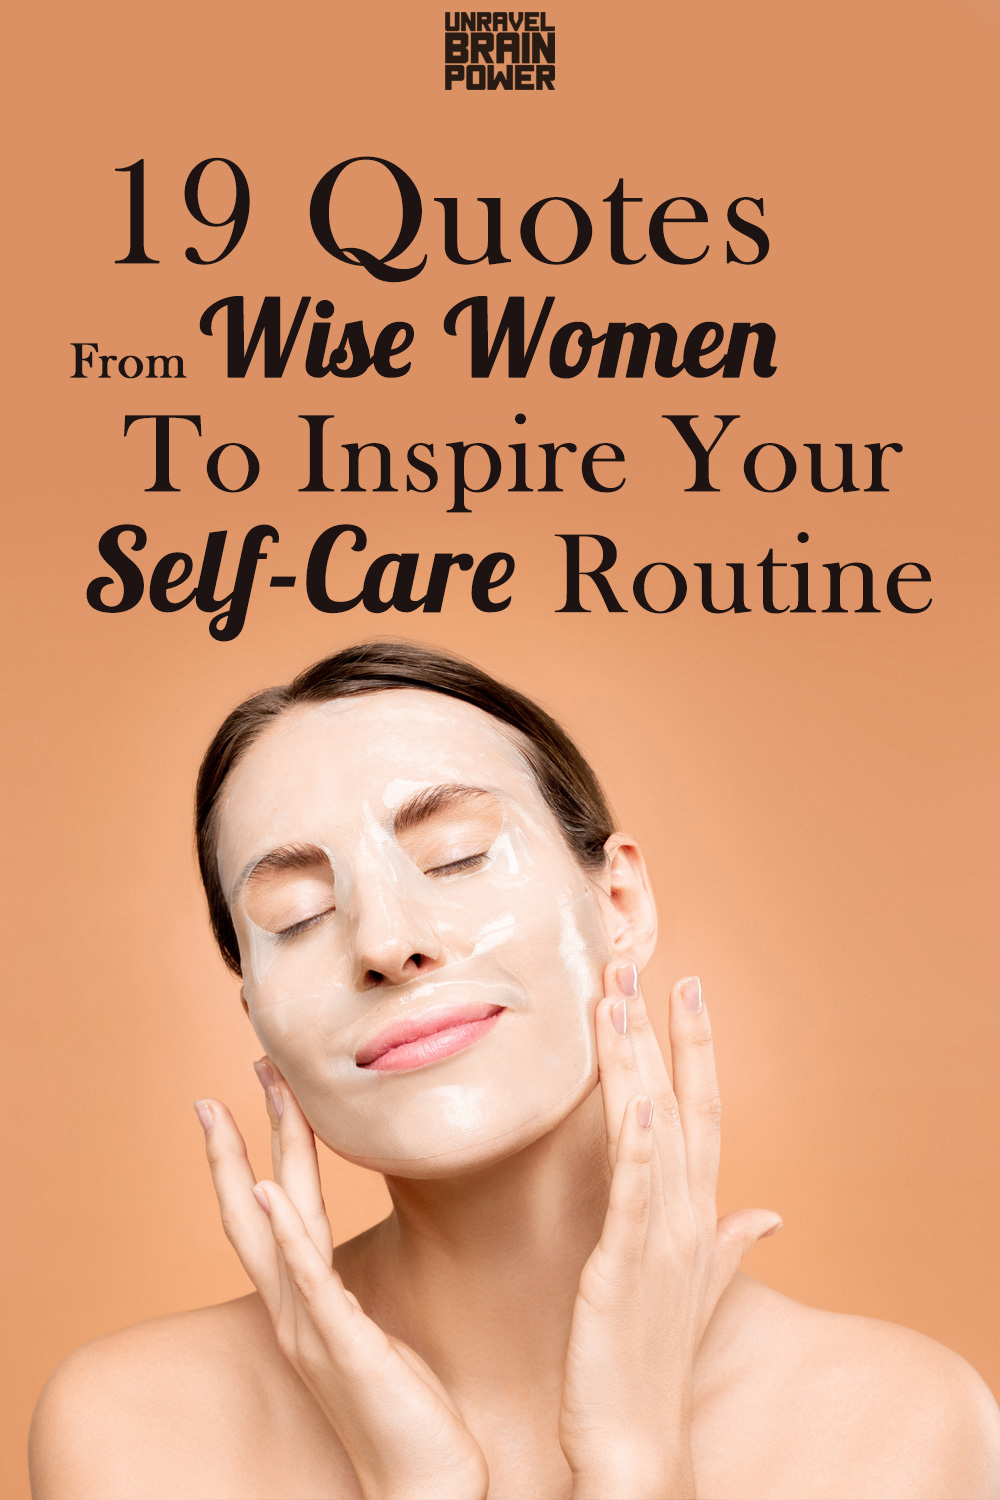 19 Self-care Quotes From Wise Women To Inspire Your Self-Care Routine